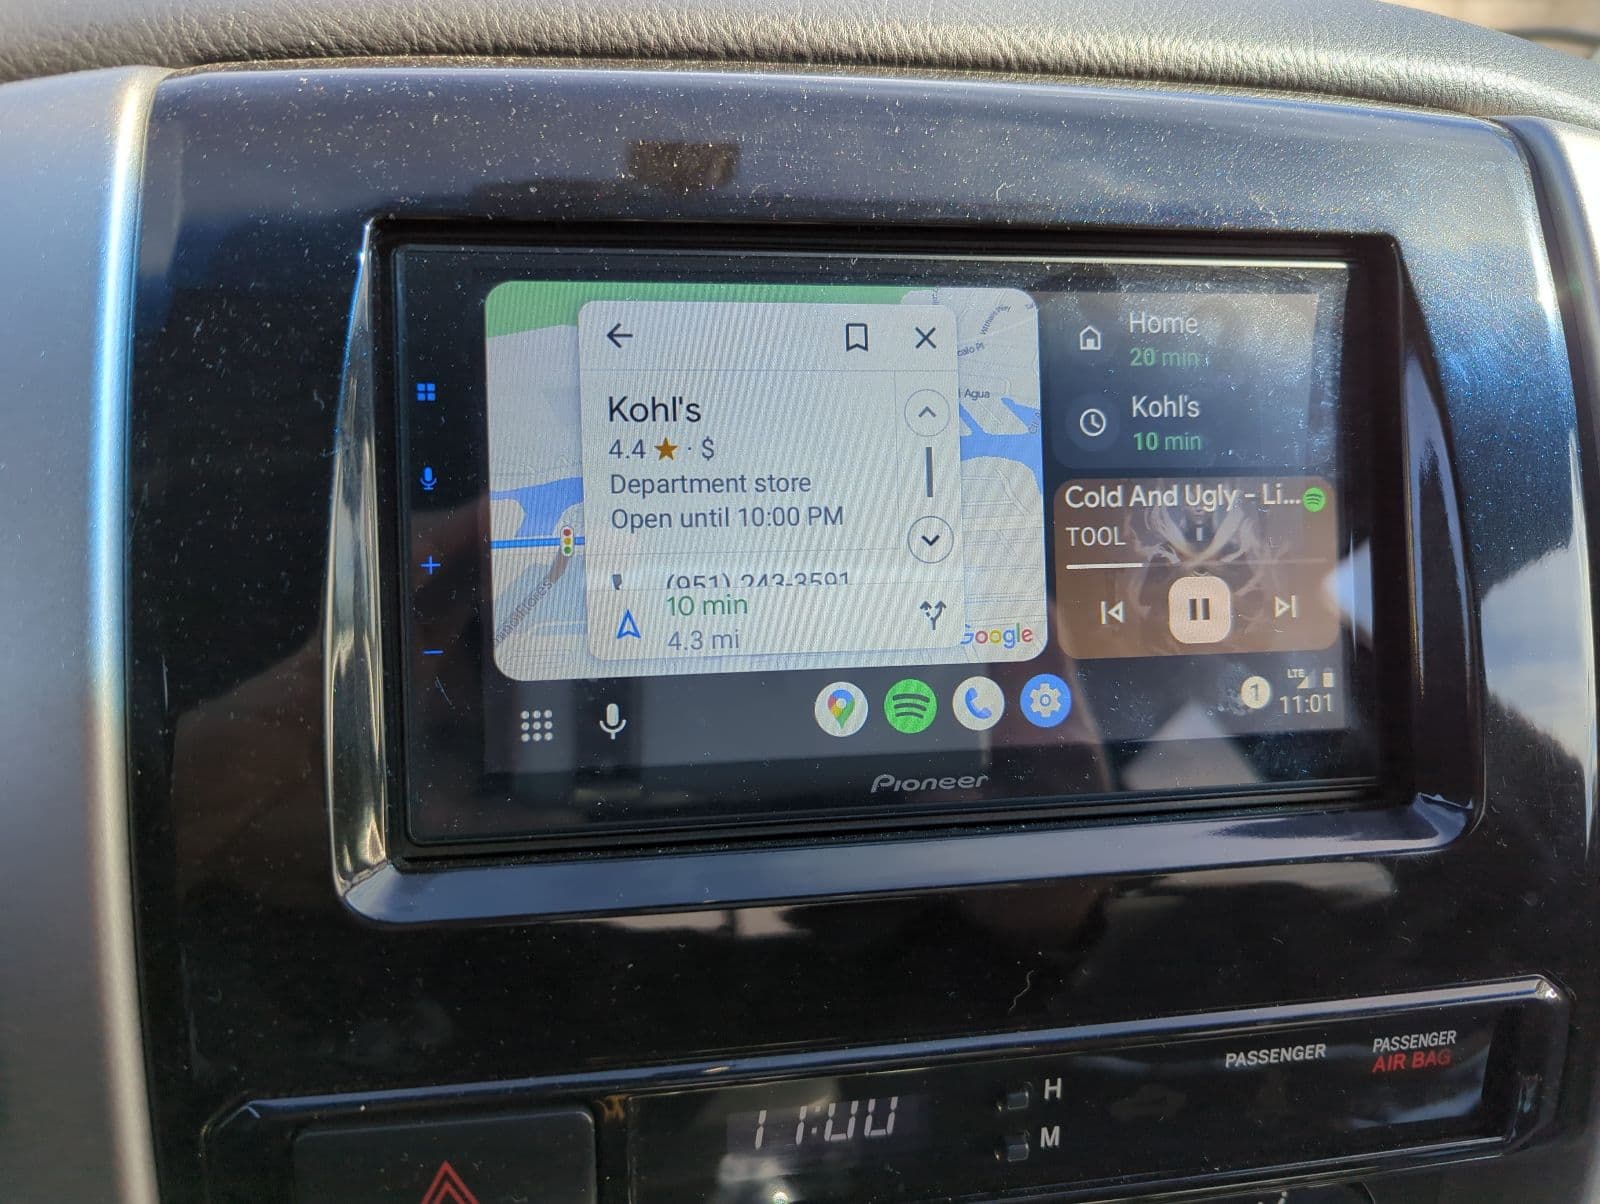 Android Auto coolwalk ui enabled